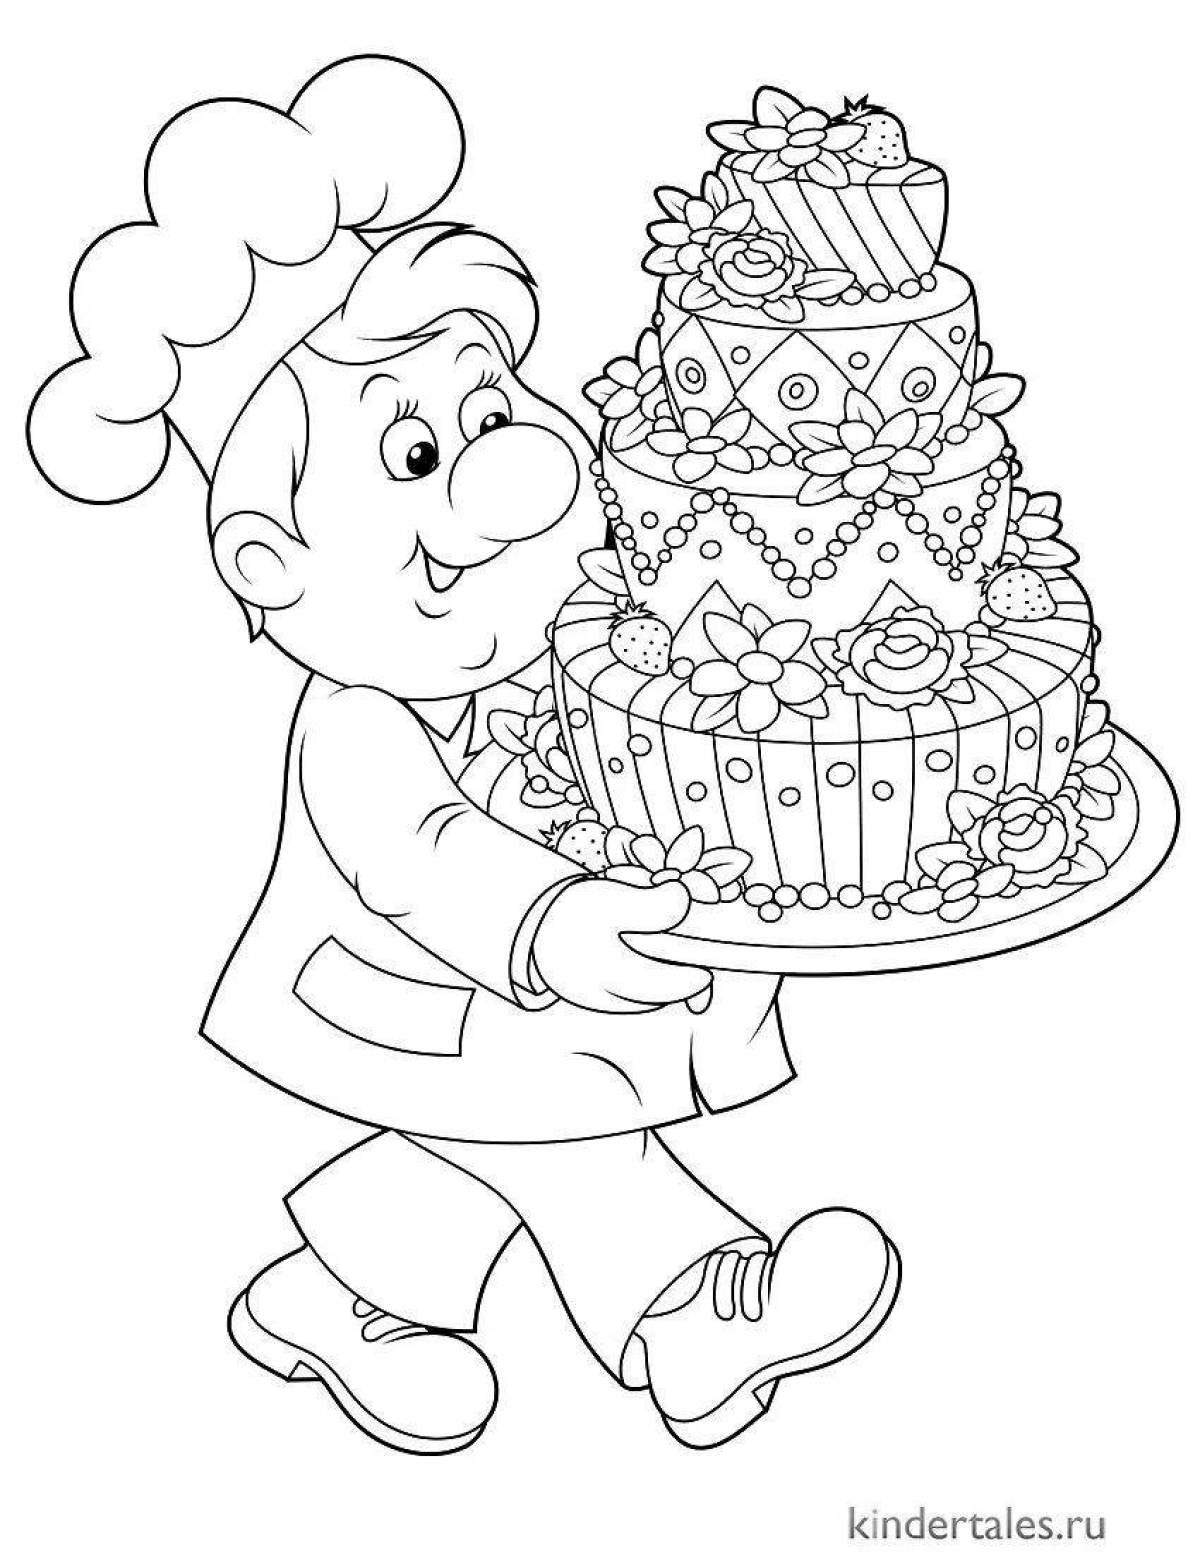 Coloring page charming pastry chef